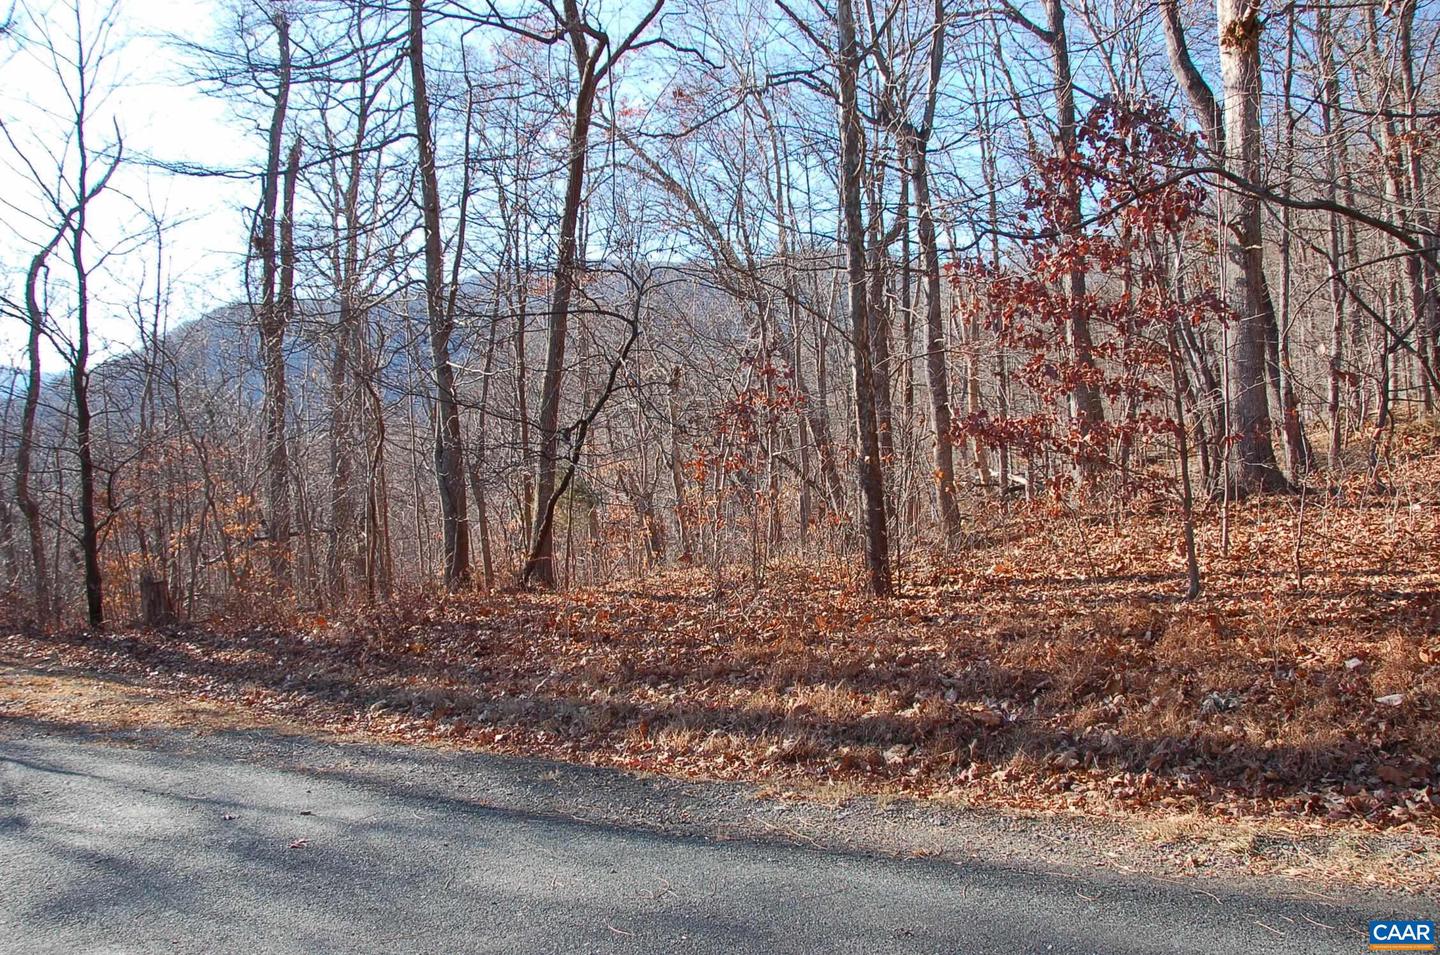 60 SCARLET TANAGER, NELLYSFORD, Virginia 22958, ,Land,For sale,60 SCARLET TANAGER,648064 MLS # 648064